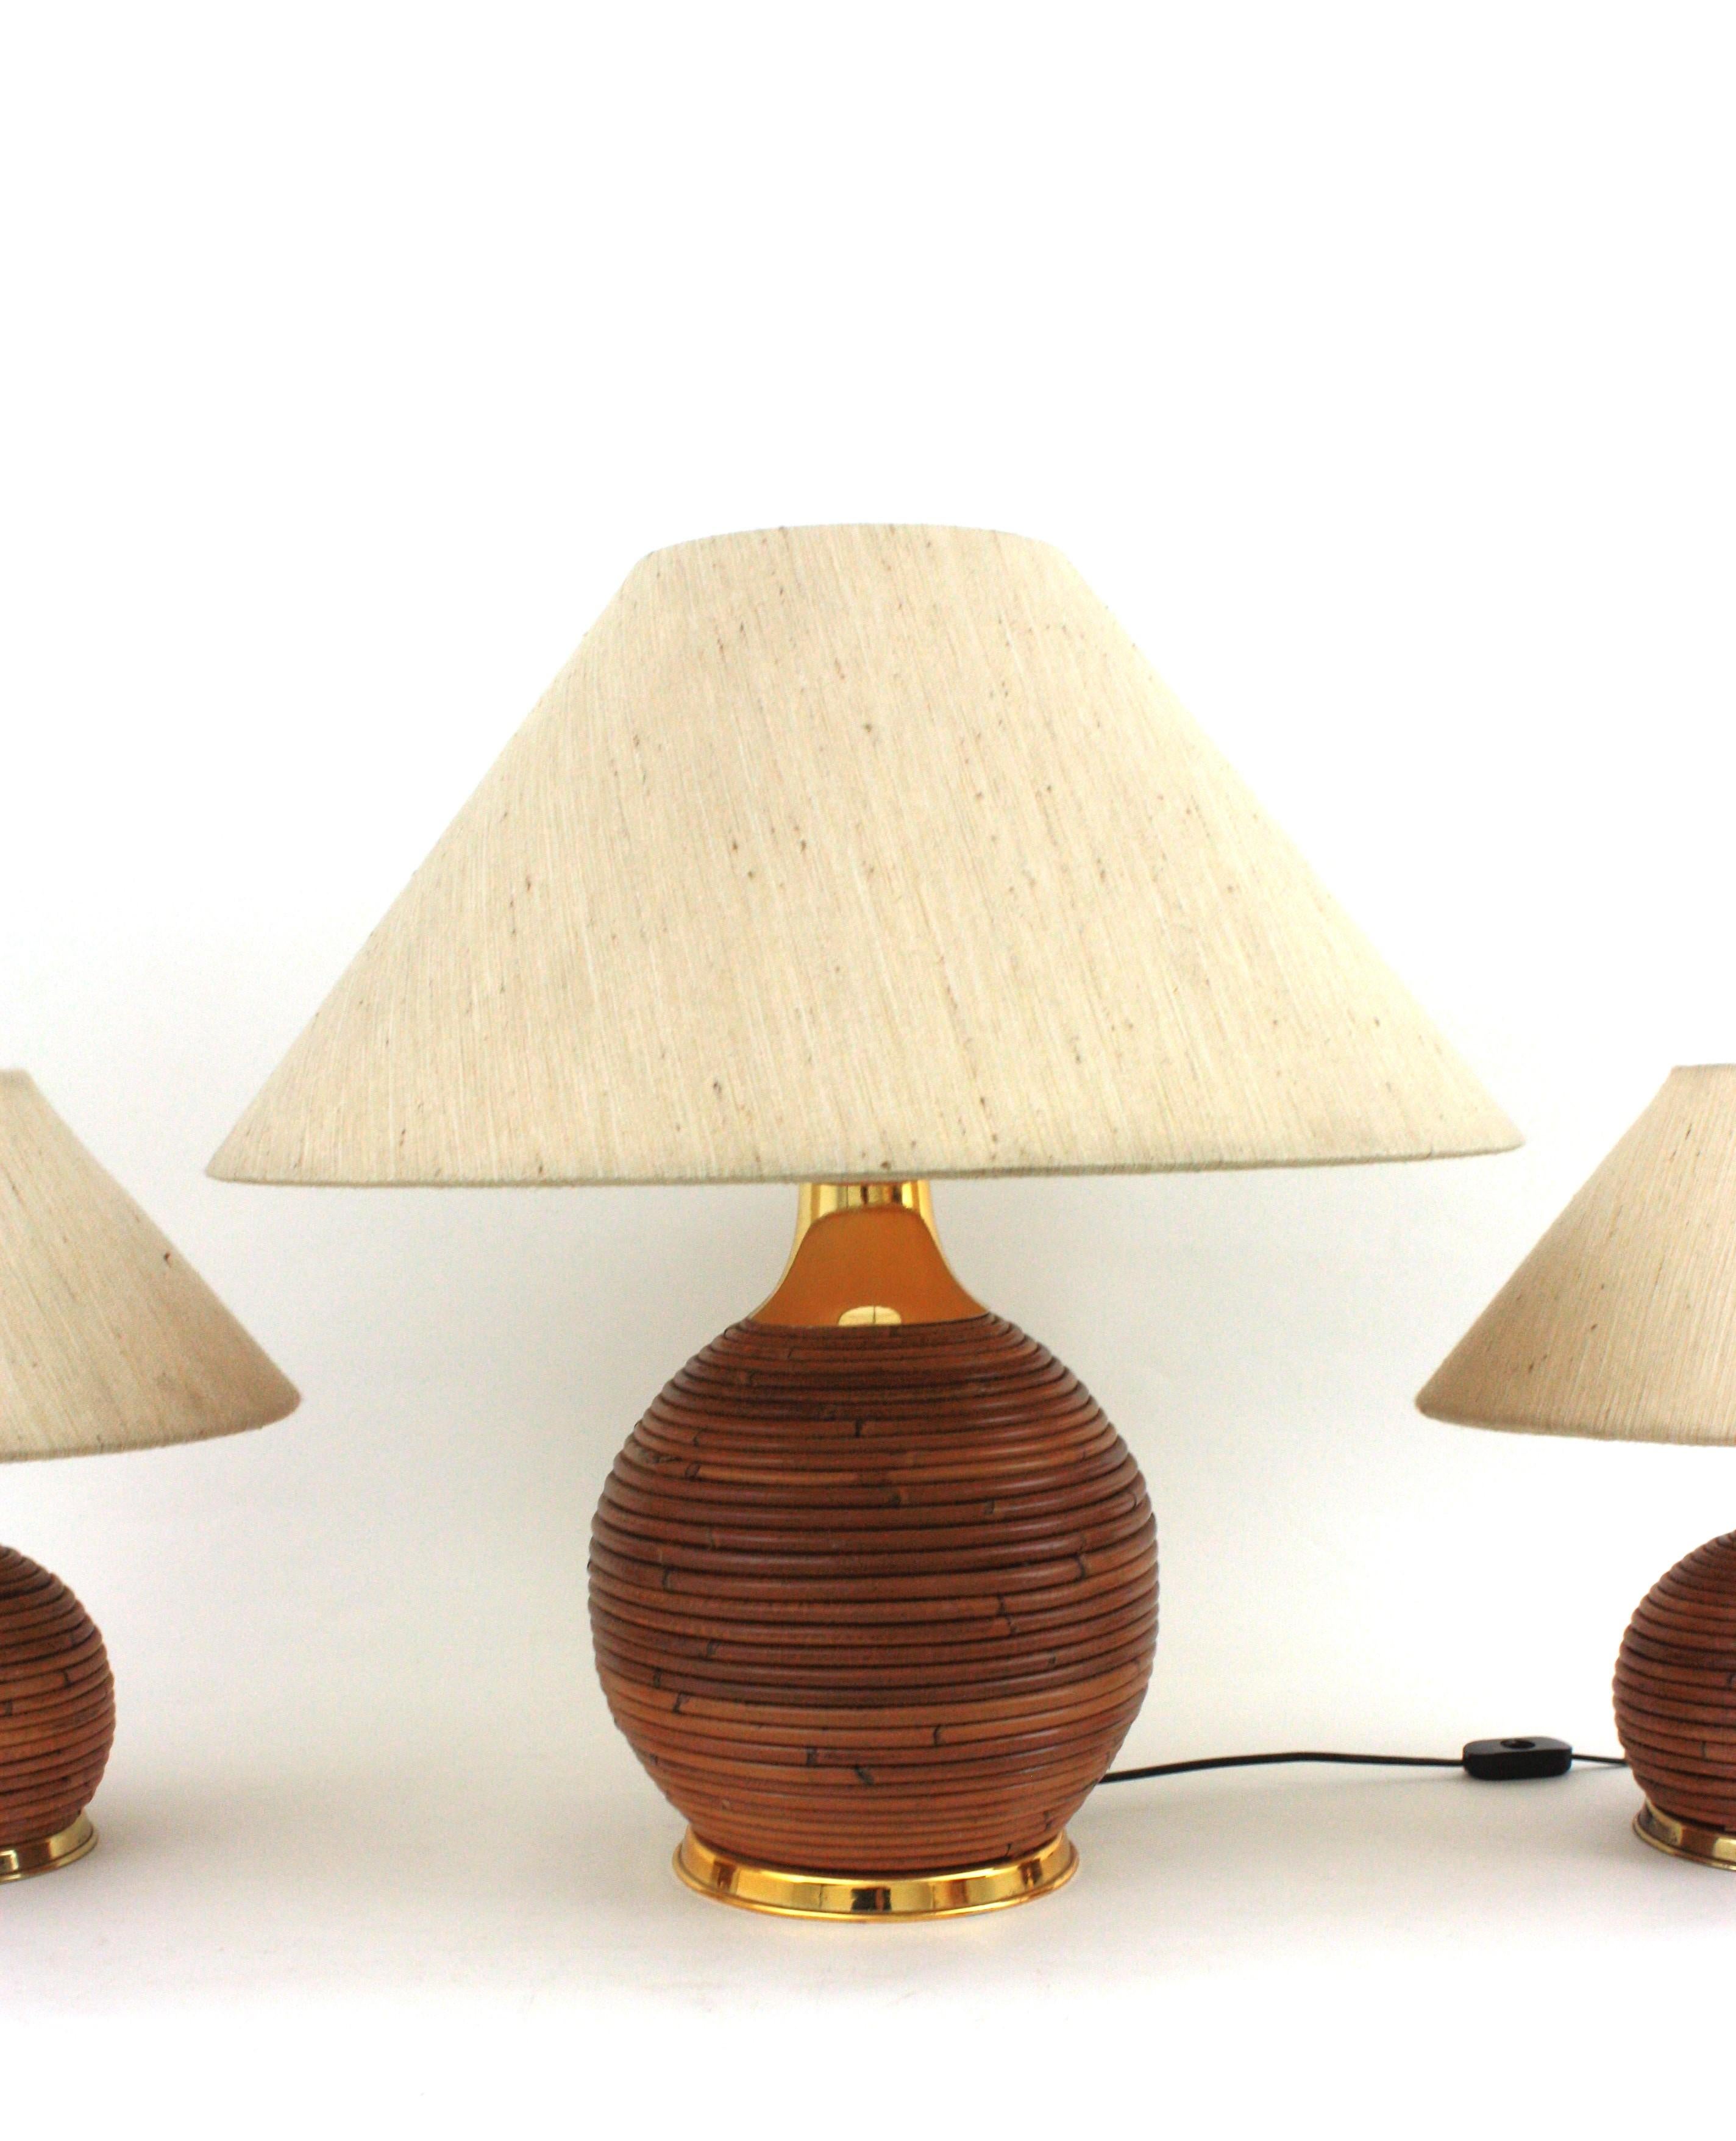 Large Italian Rattan and Brass Ball Table Lamp, 1970s For Sale 1